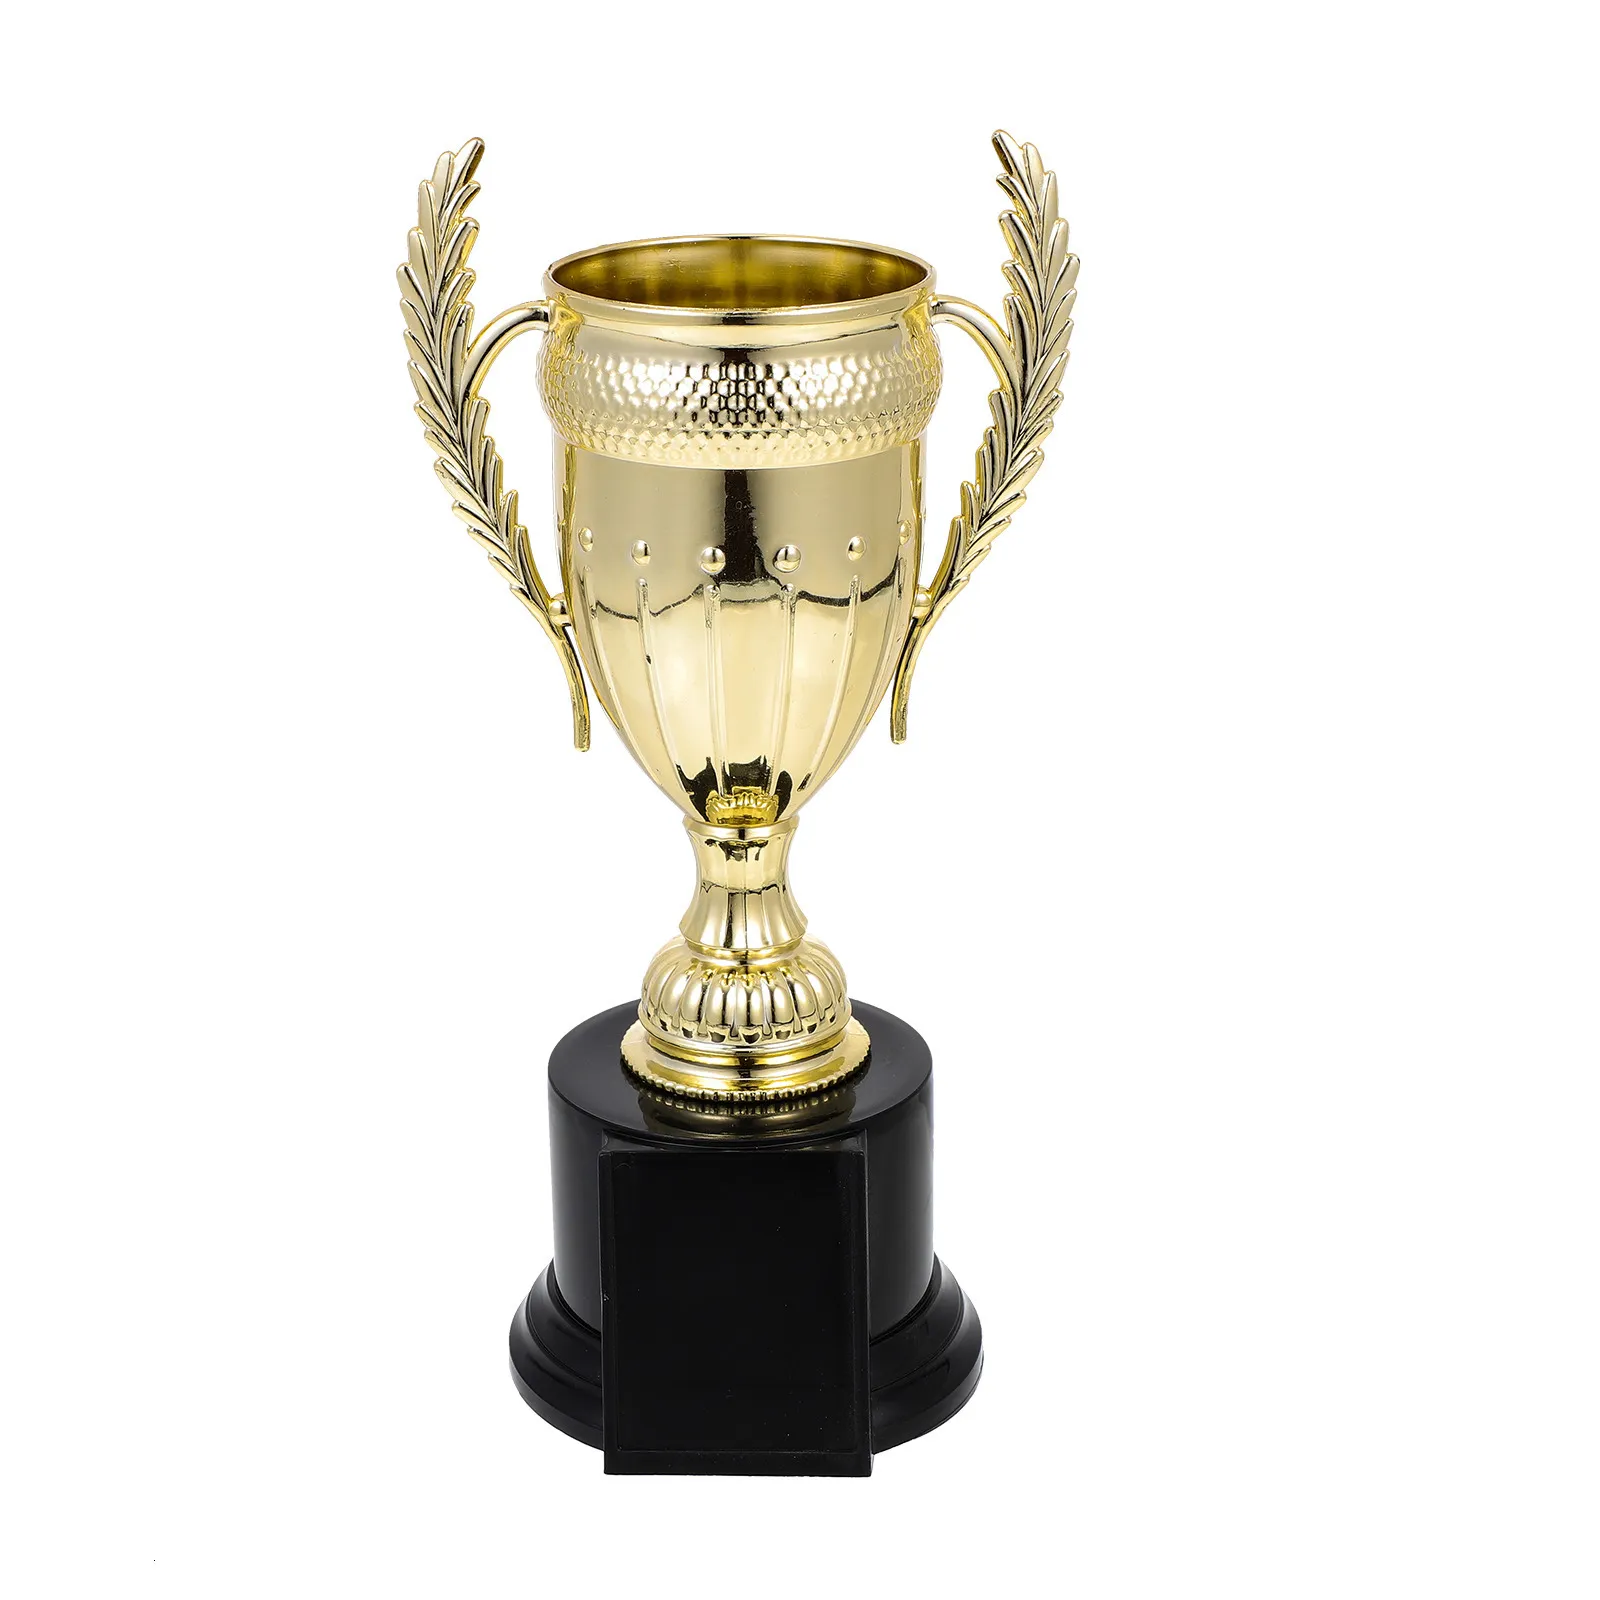 Decorative Objects Award Trophy Game Cups Competition Match Celebrations for School Winning Prizes Golden 230815